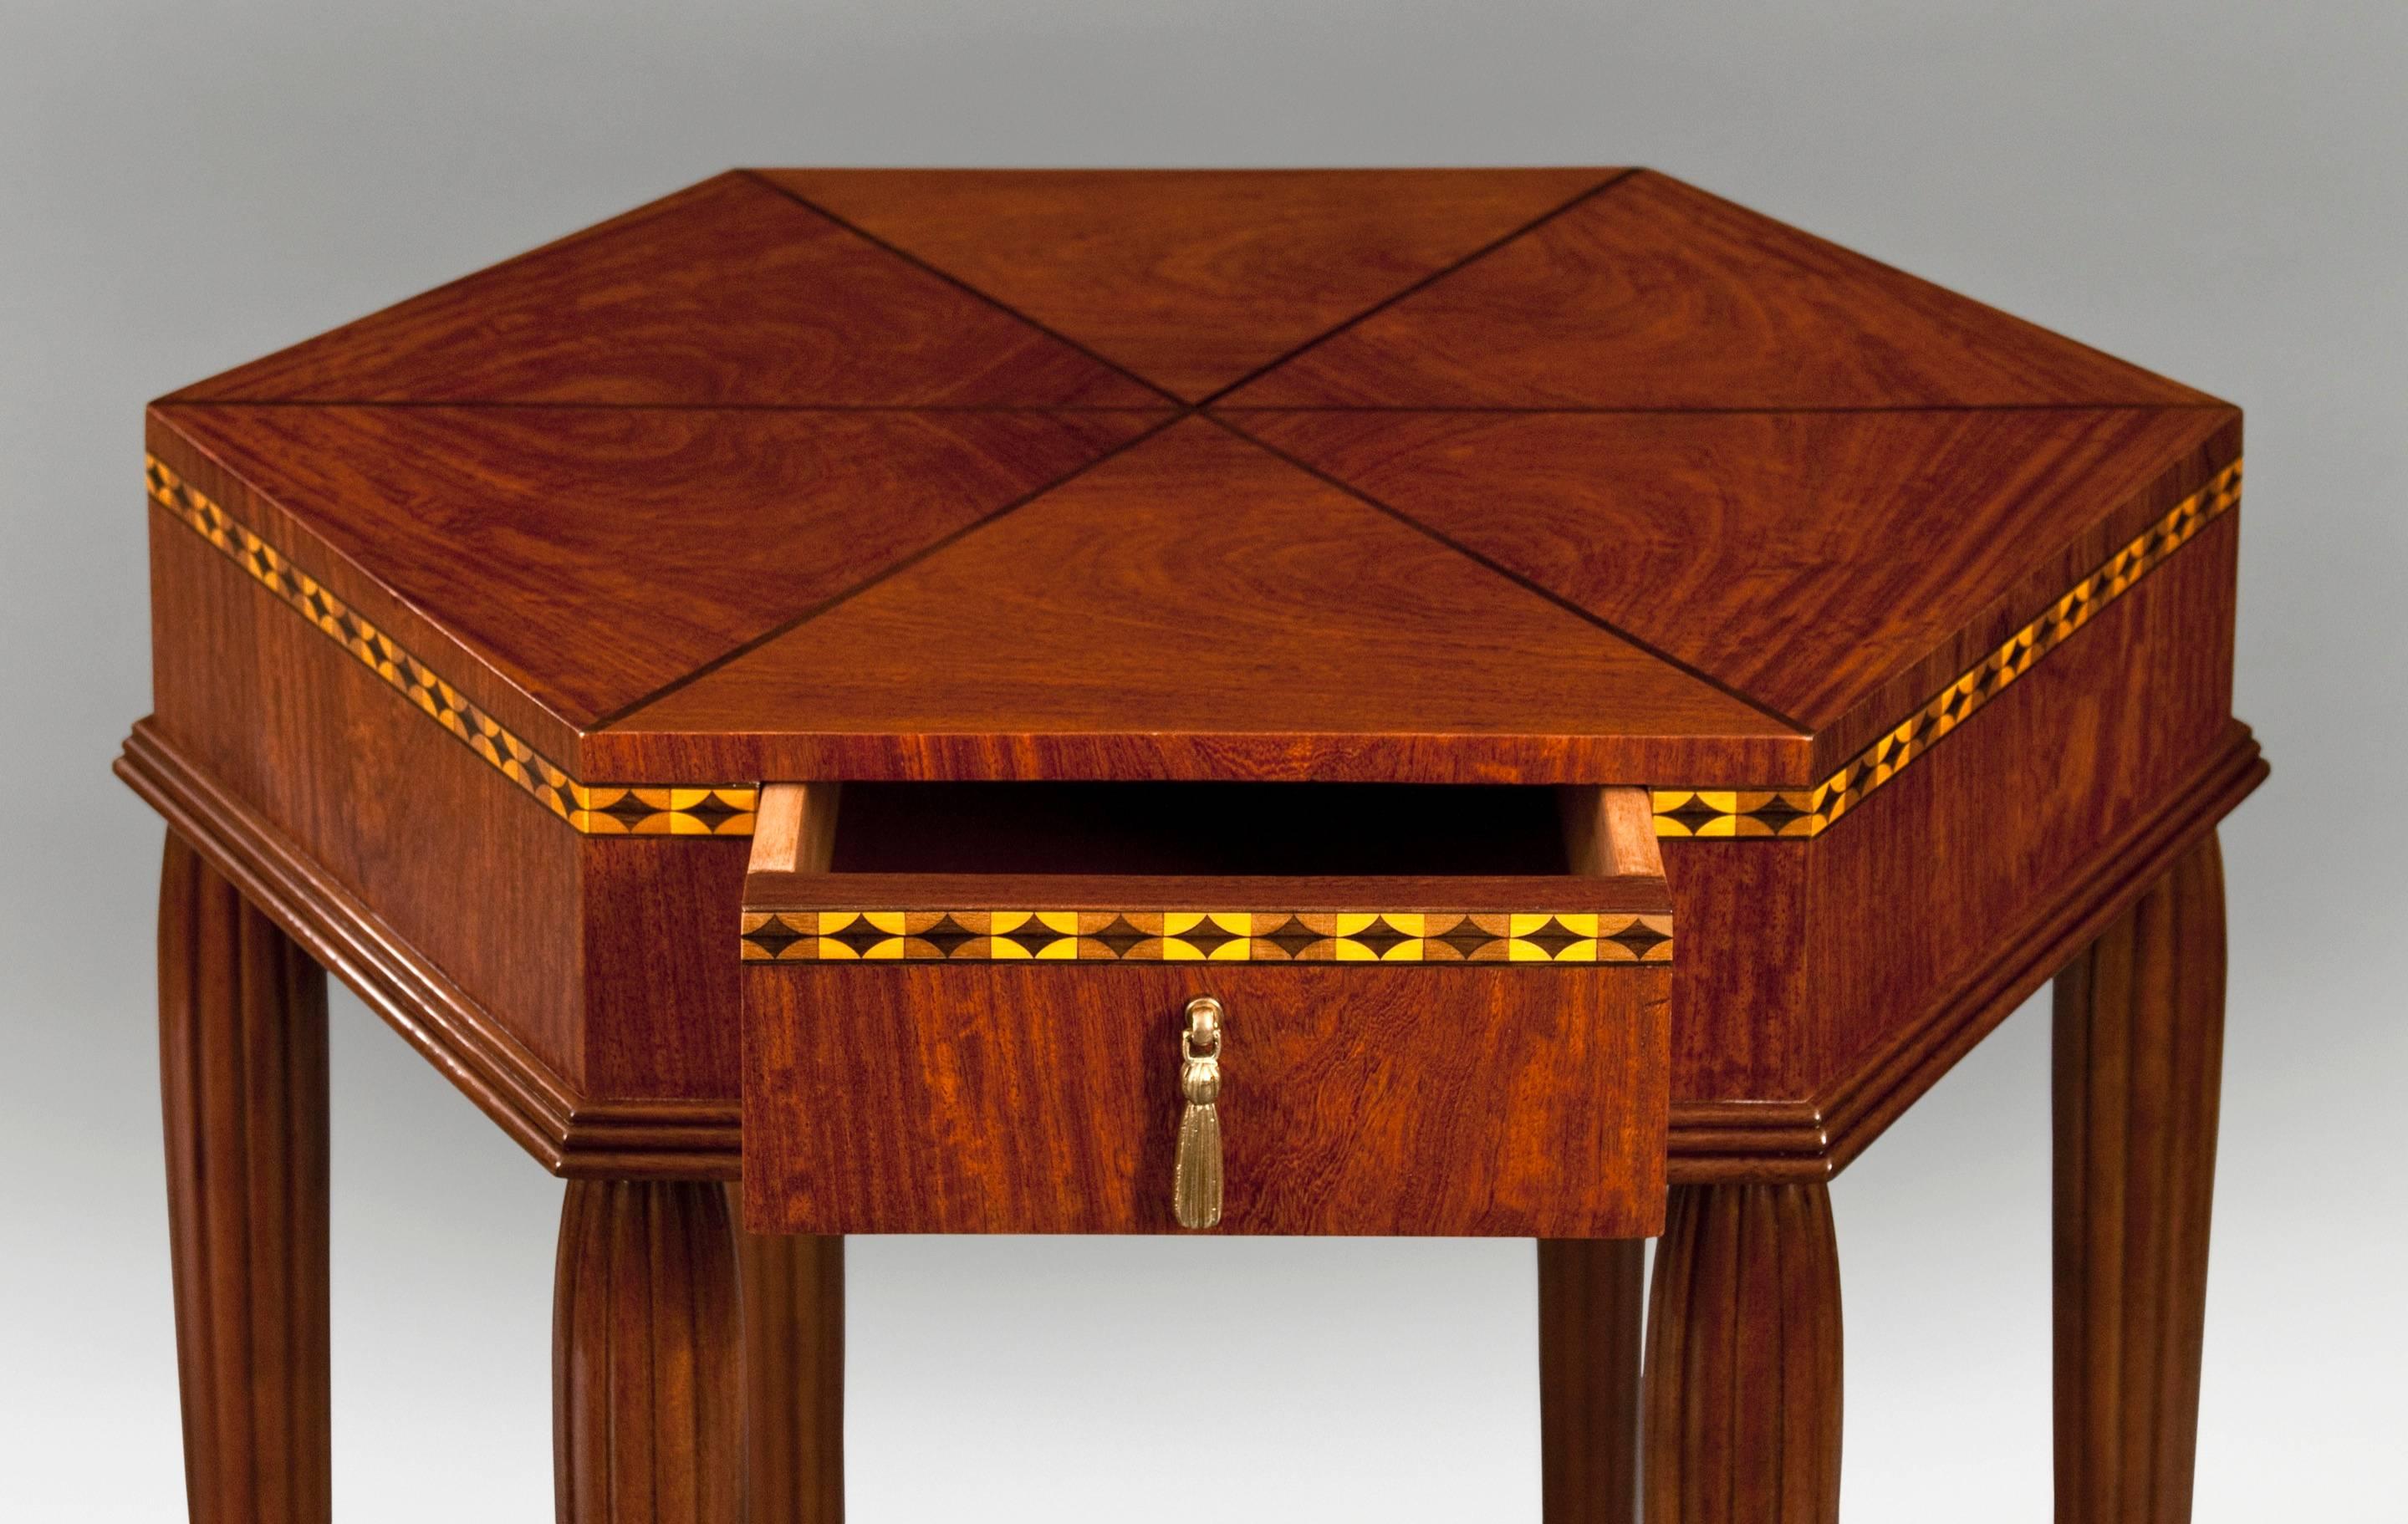 French Art Deco Ash and Bubinga Hexagonal Table With Drawer
The hexagonal top with radiating ebonized banding, above a conforming apron with diamond parquetry and a molded base, centering a single drawer with bronze tassel pull, on six fluted